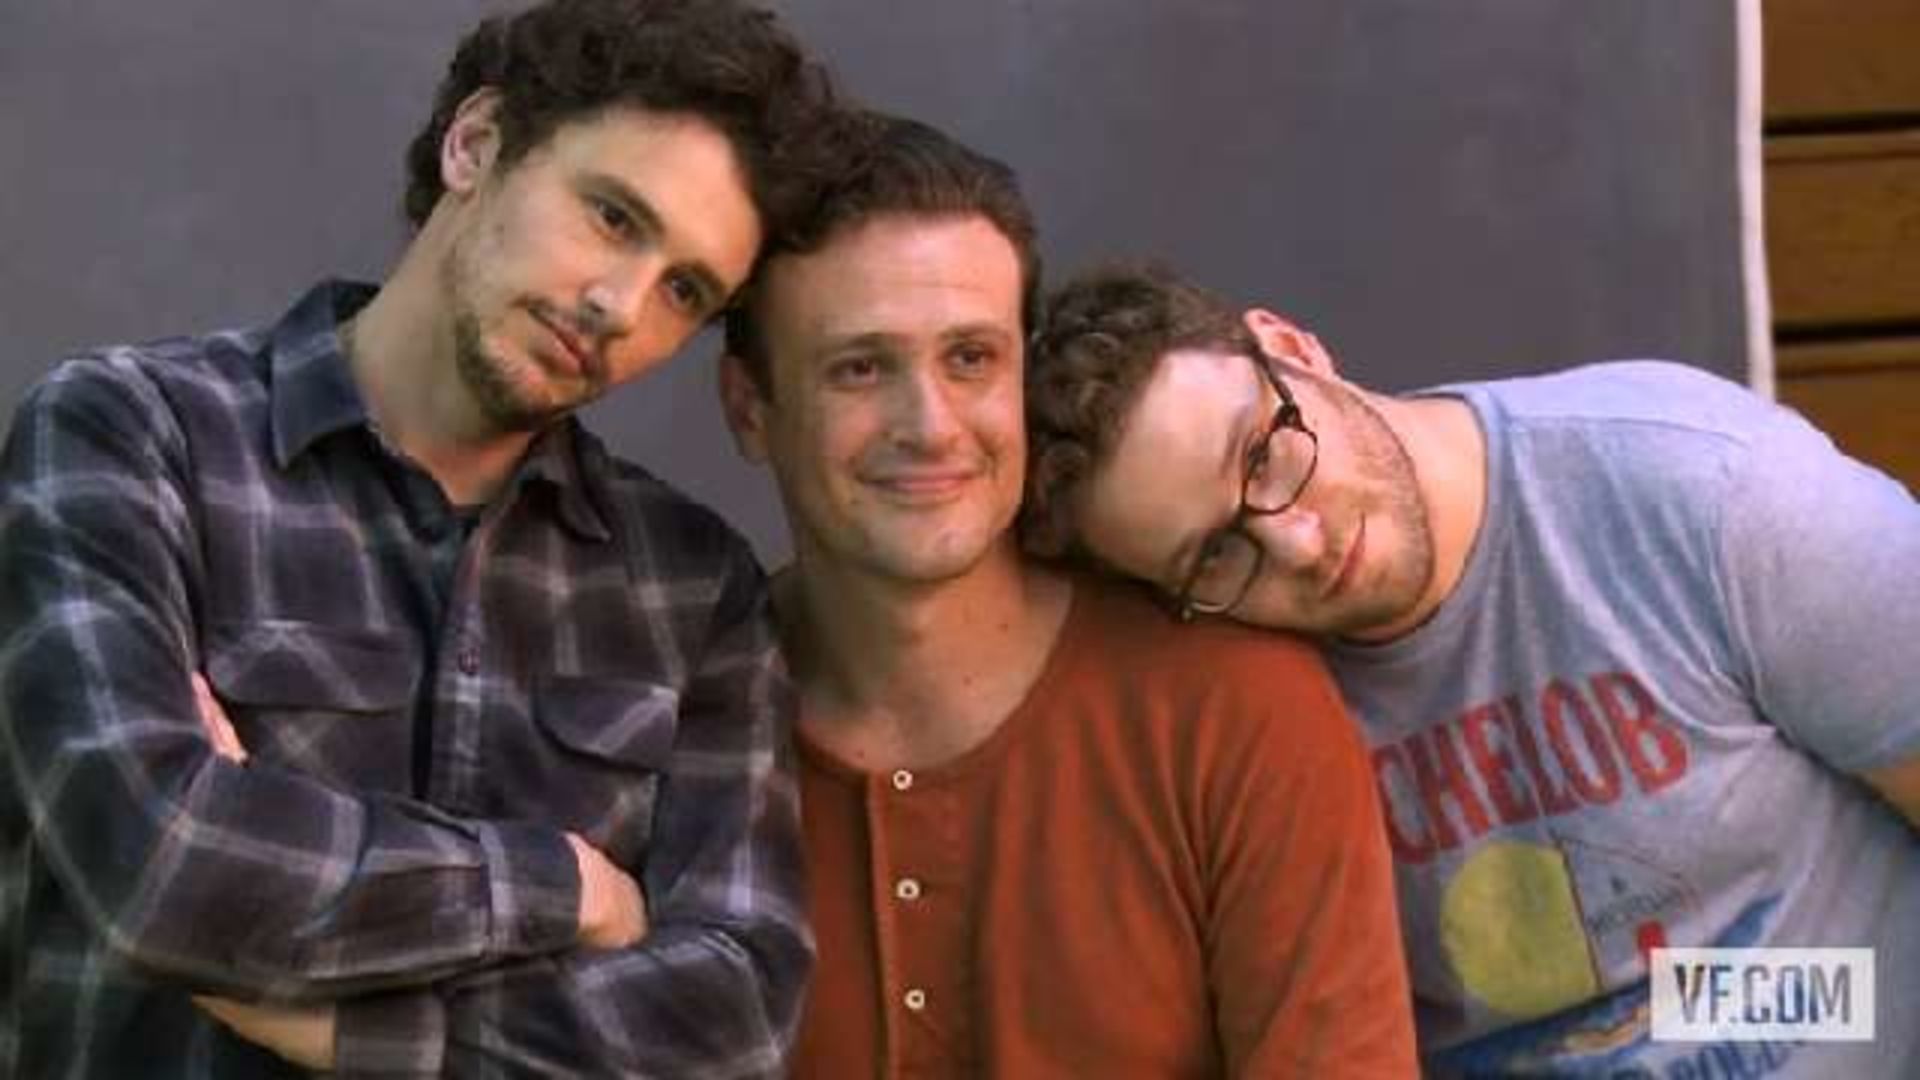 Watch The Cast Of “freaks And Geeks” On How They Got Their Roles The Comedy Issue Vanity Fair